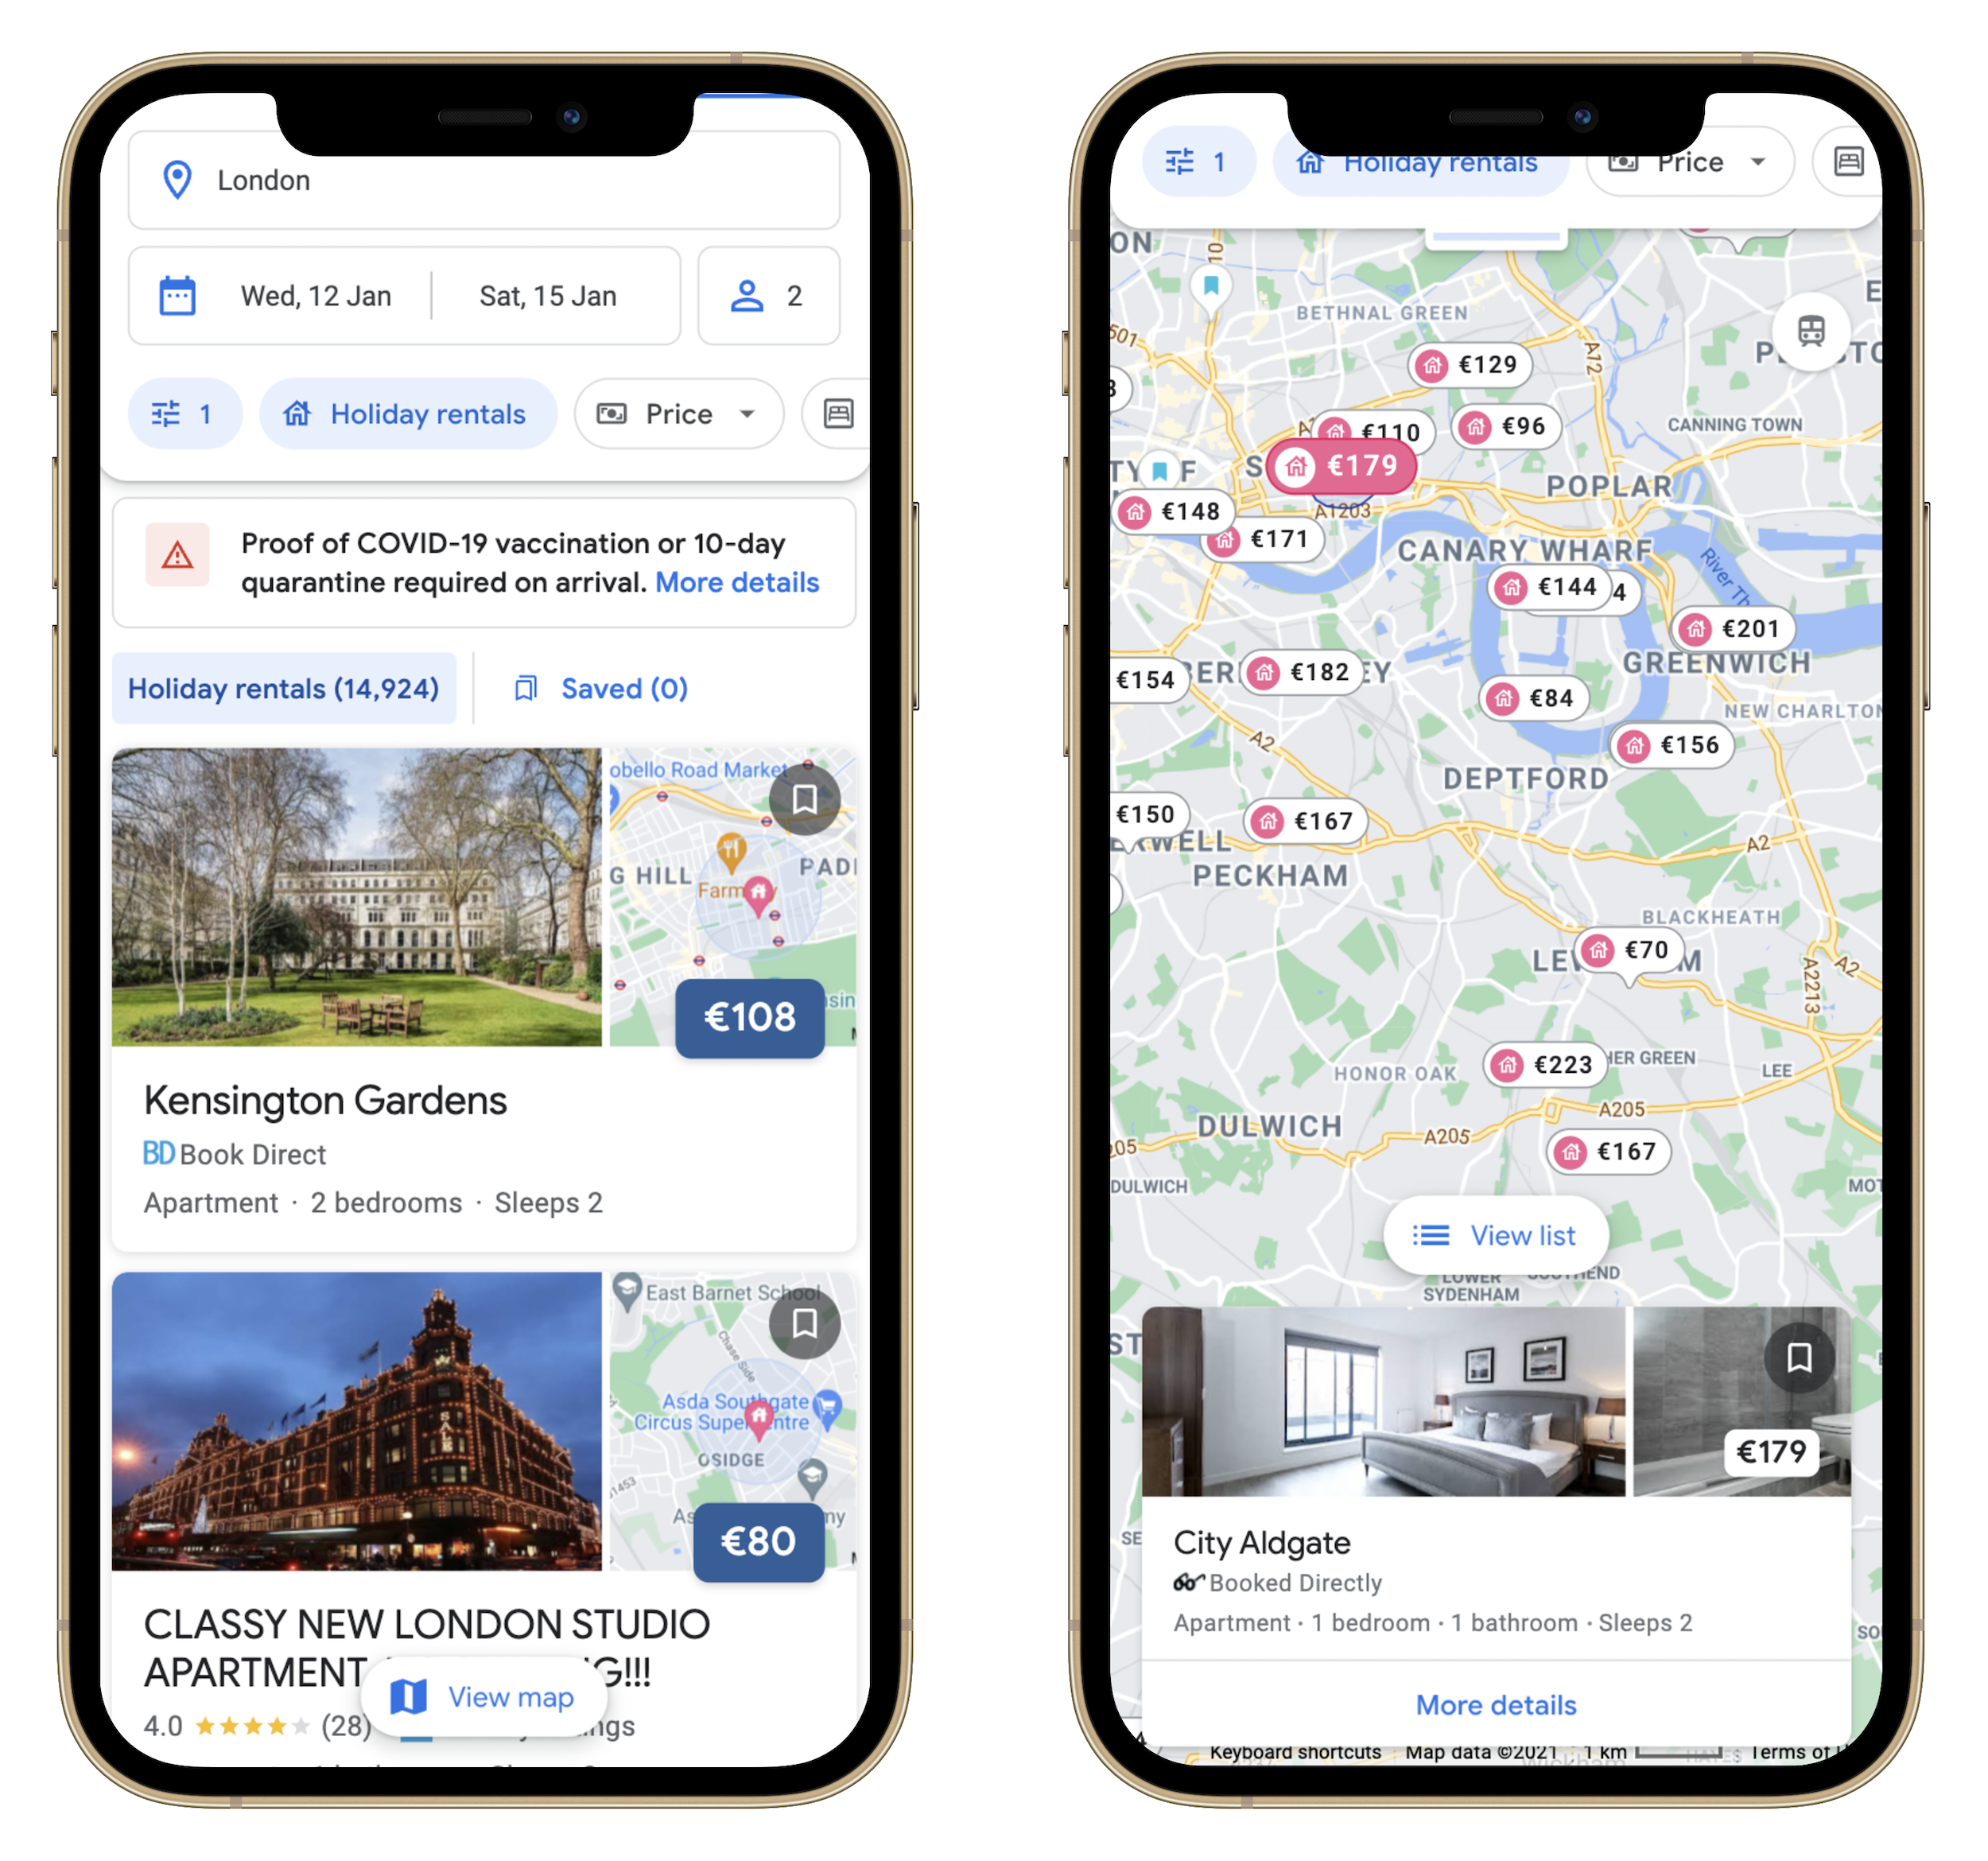 Google Vacation Rentals appearing on Google Maps with pricing